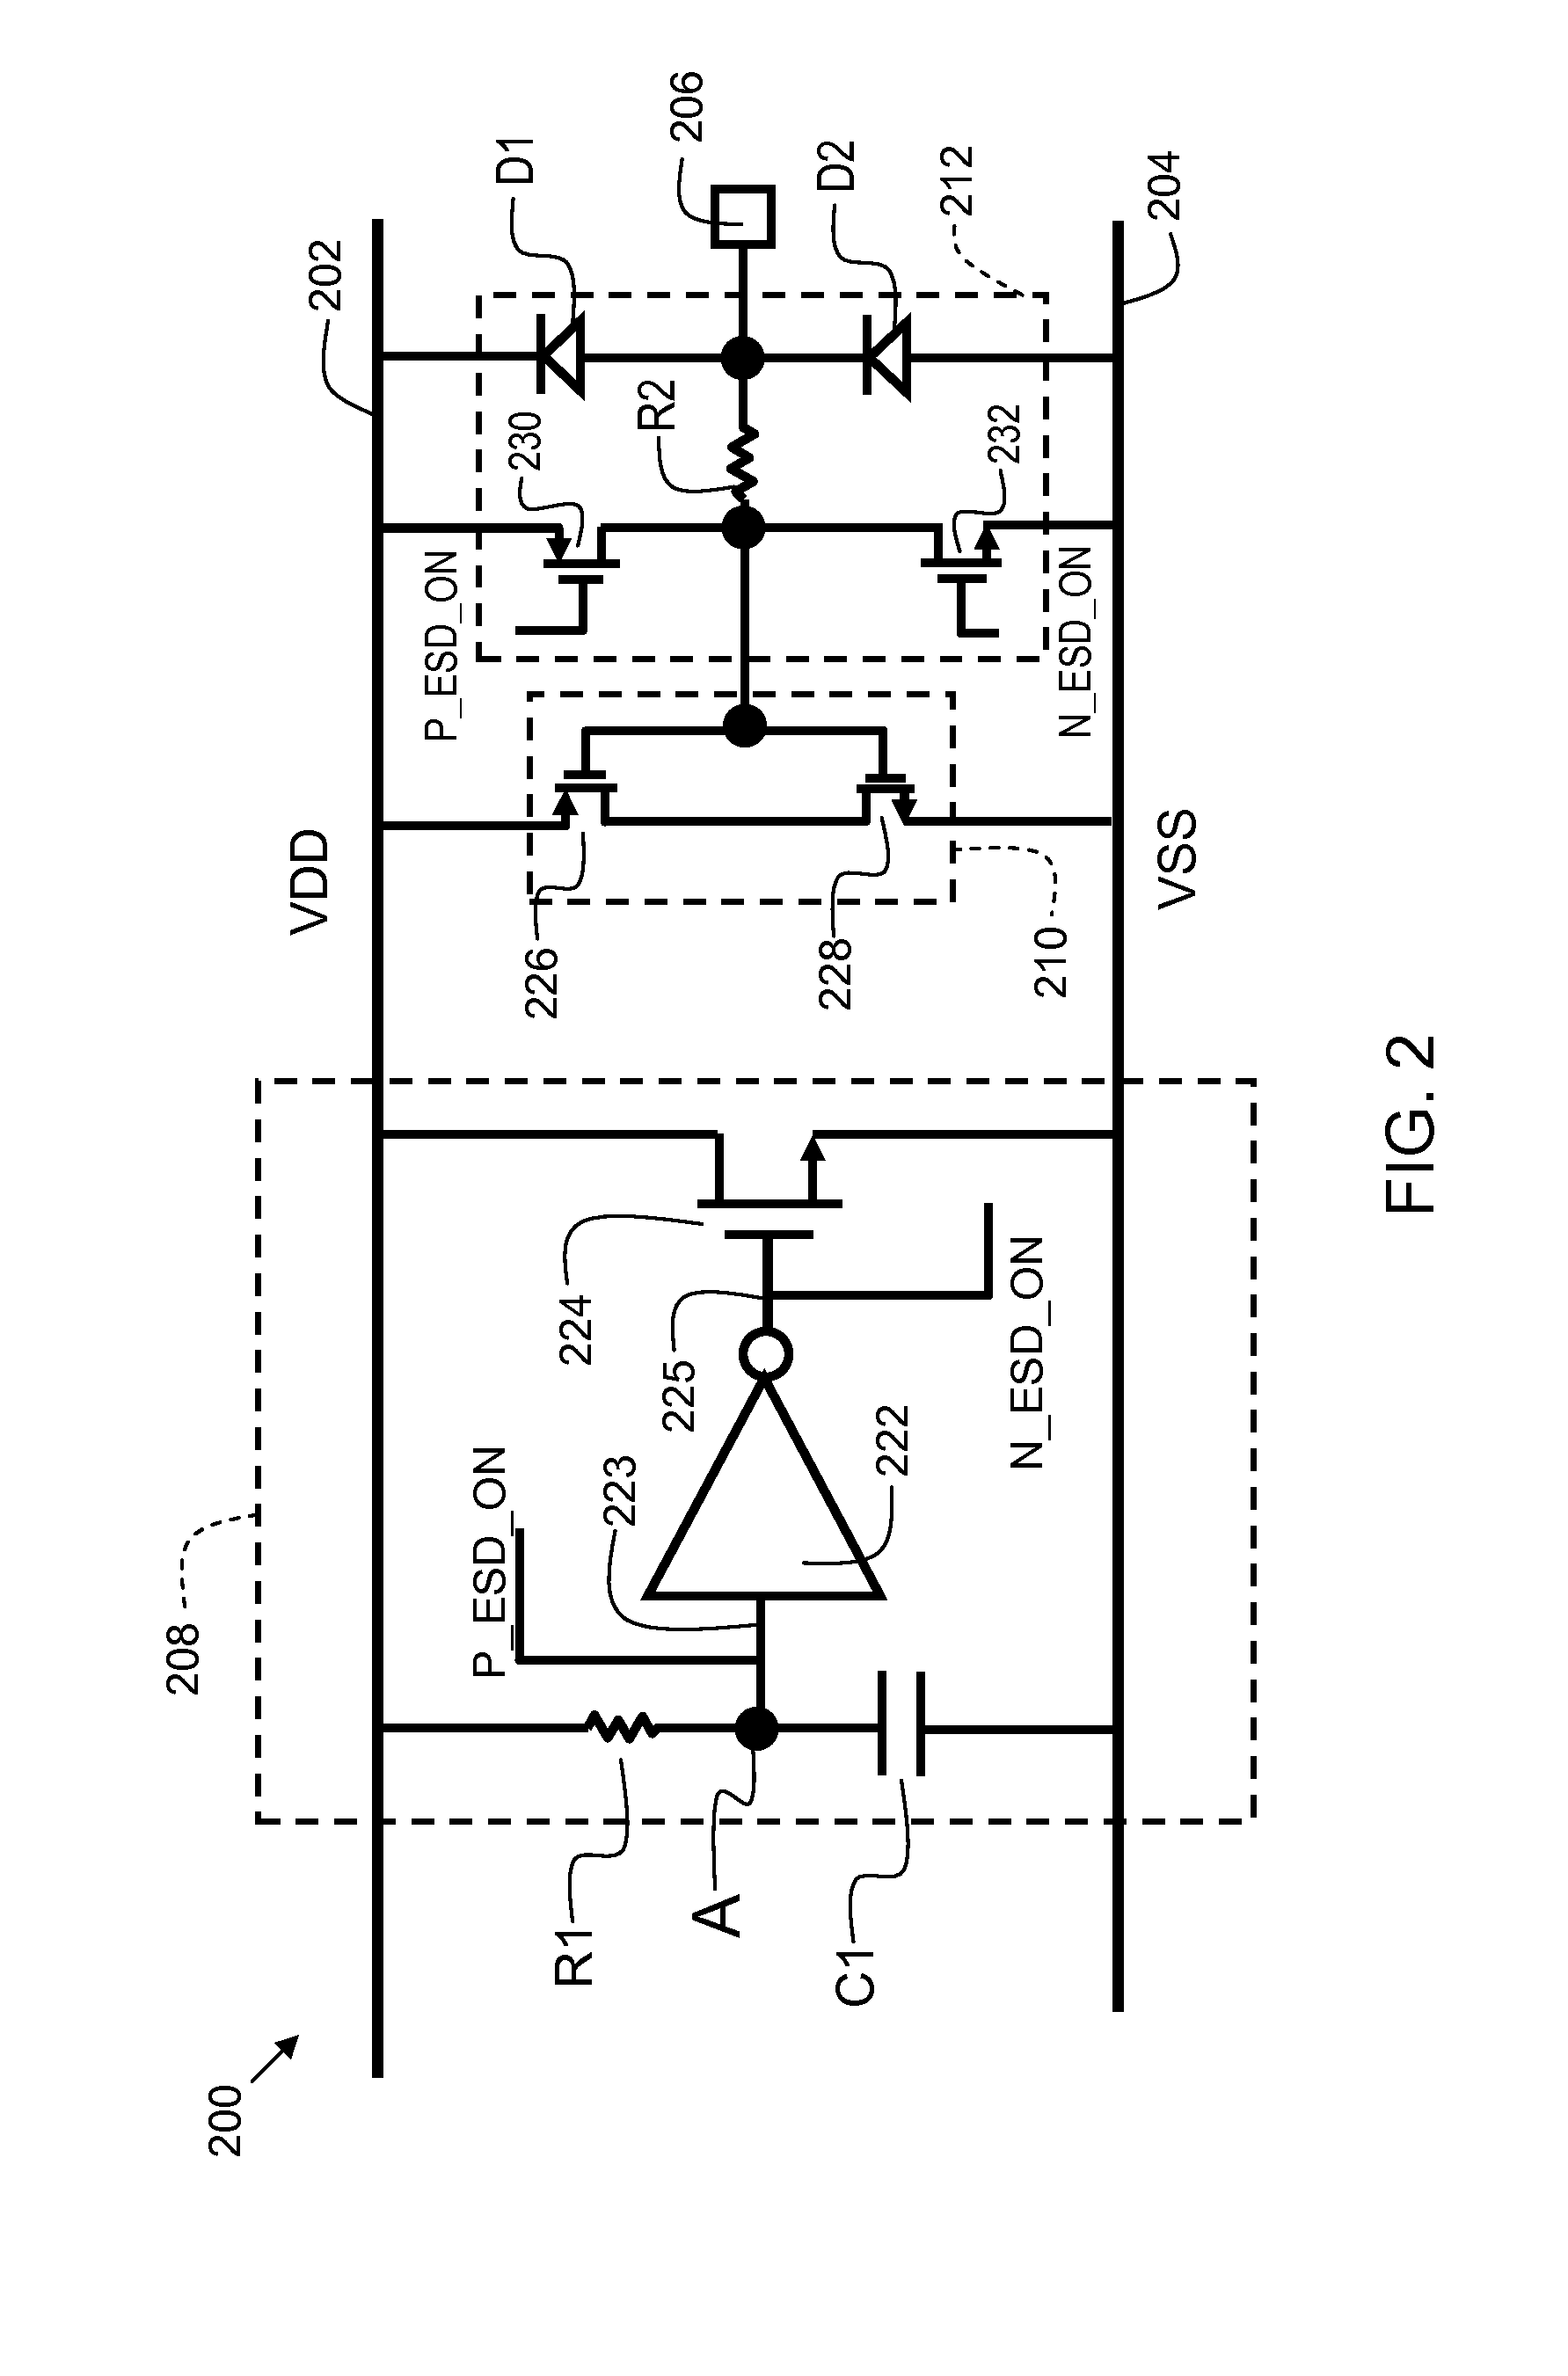 Enhanced charge device model clamp